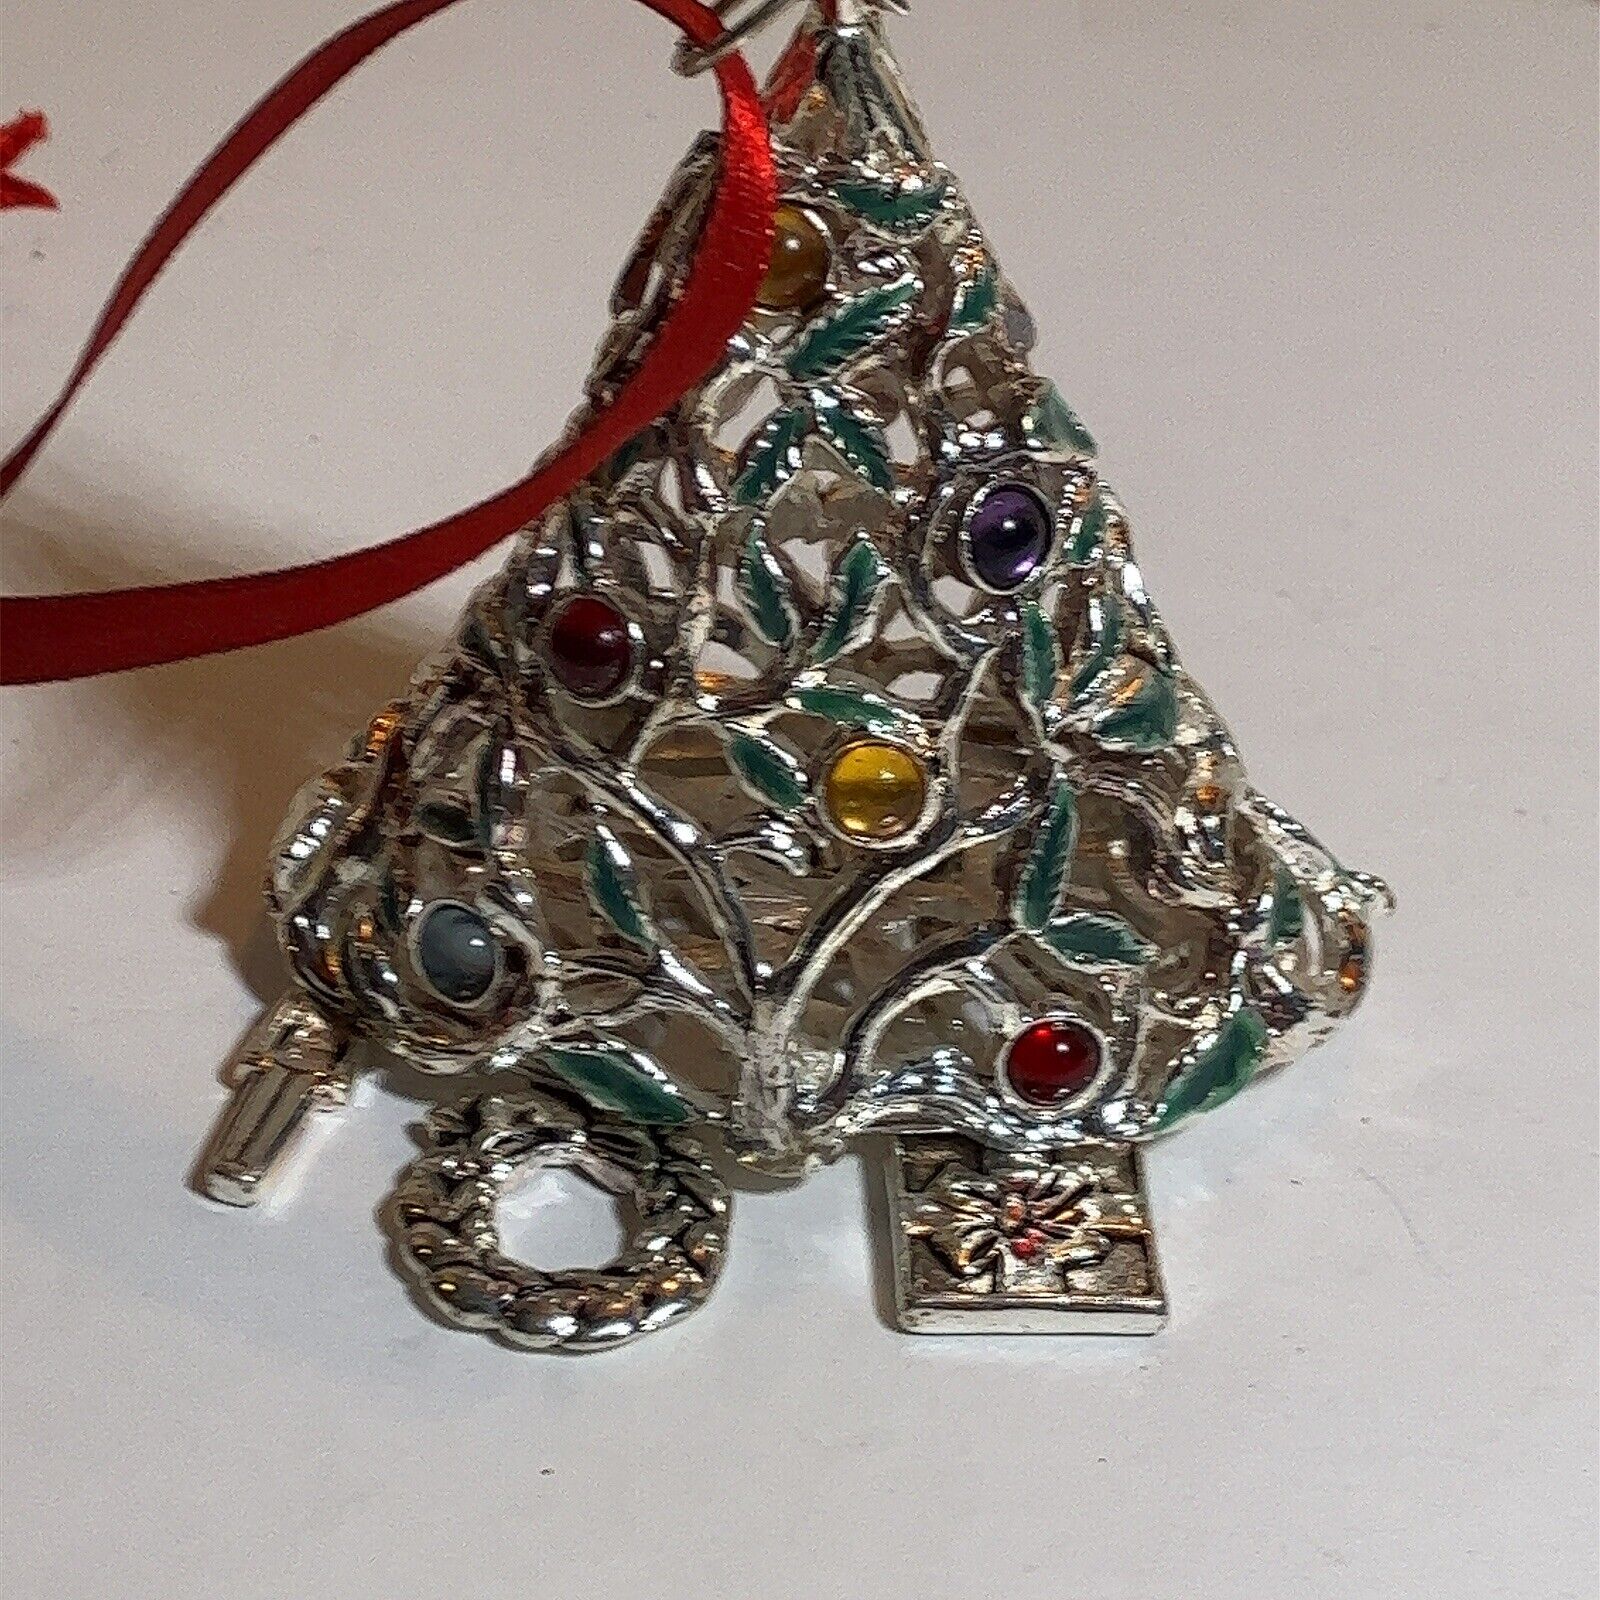 Lenox Embellished Christmas Tree With Hanging Trinkets Ornament - 6212104